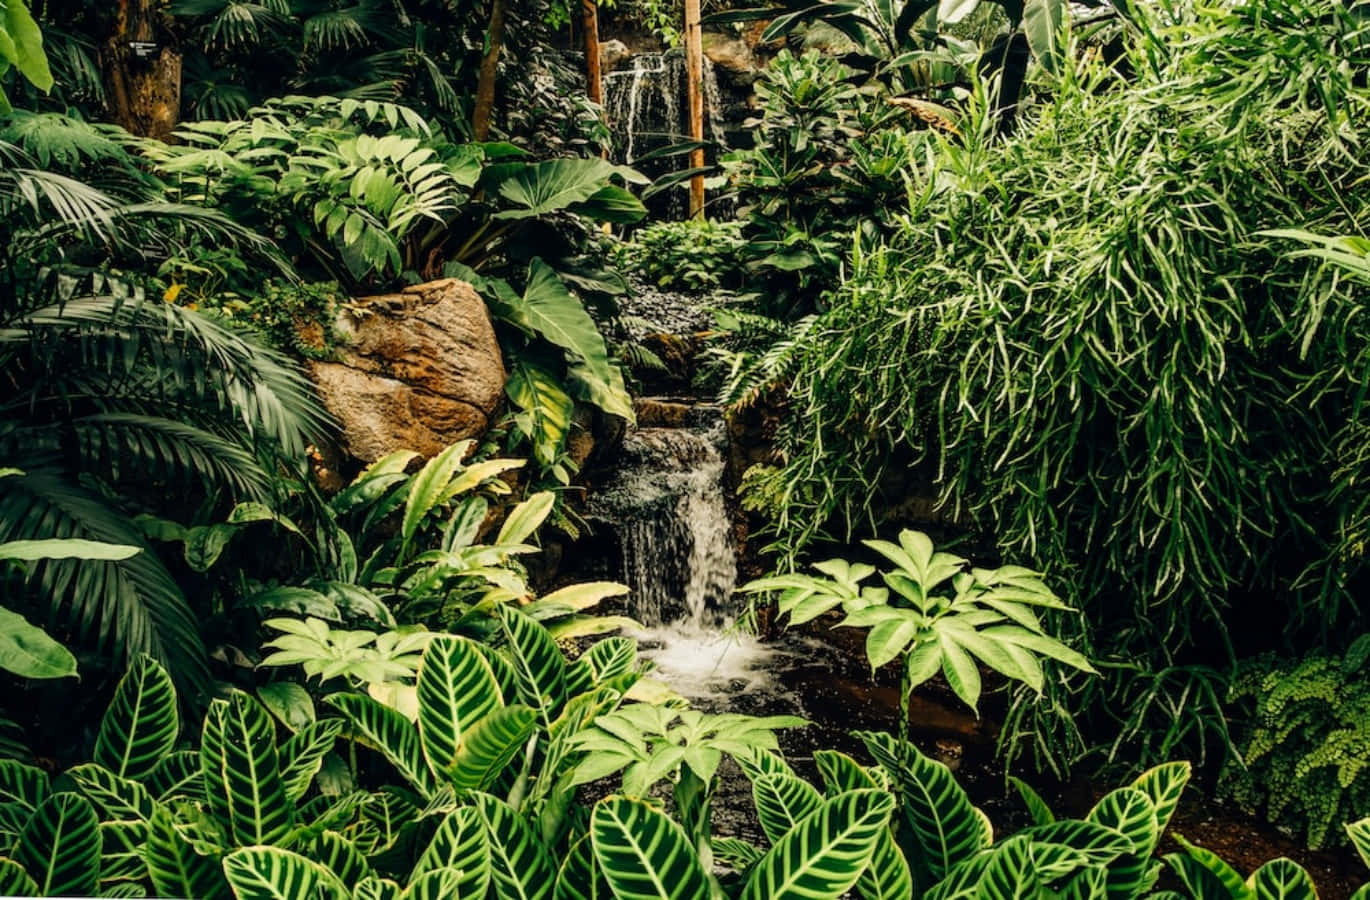 Wander through lush rainforest foliage in the untouched beauty of nature